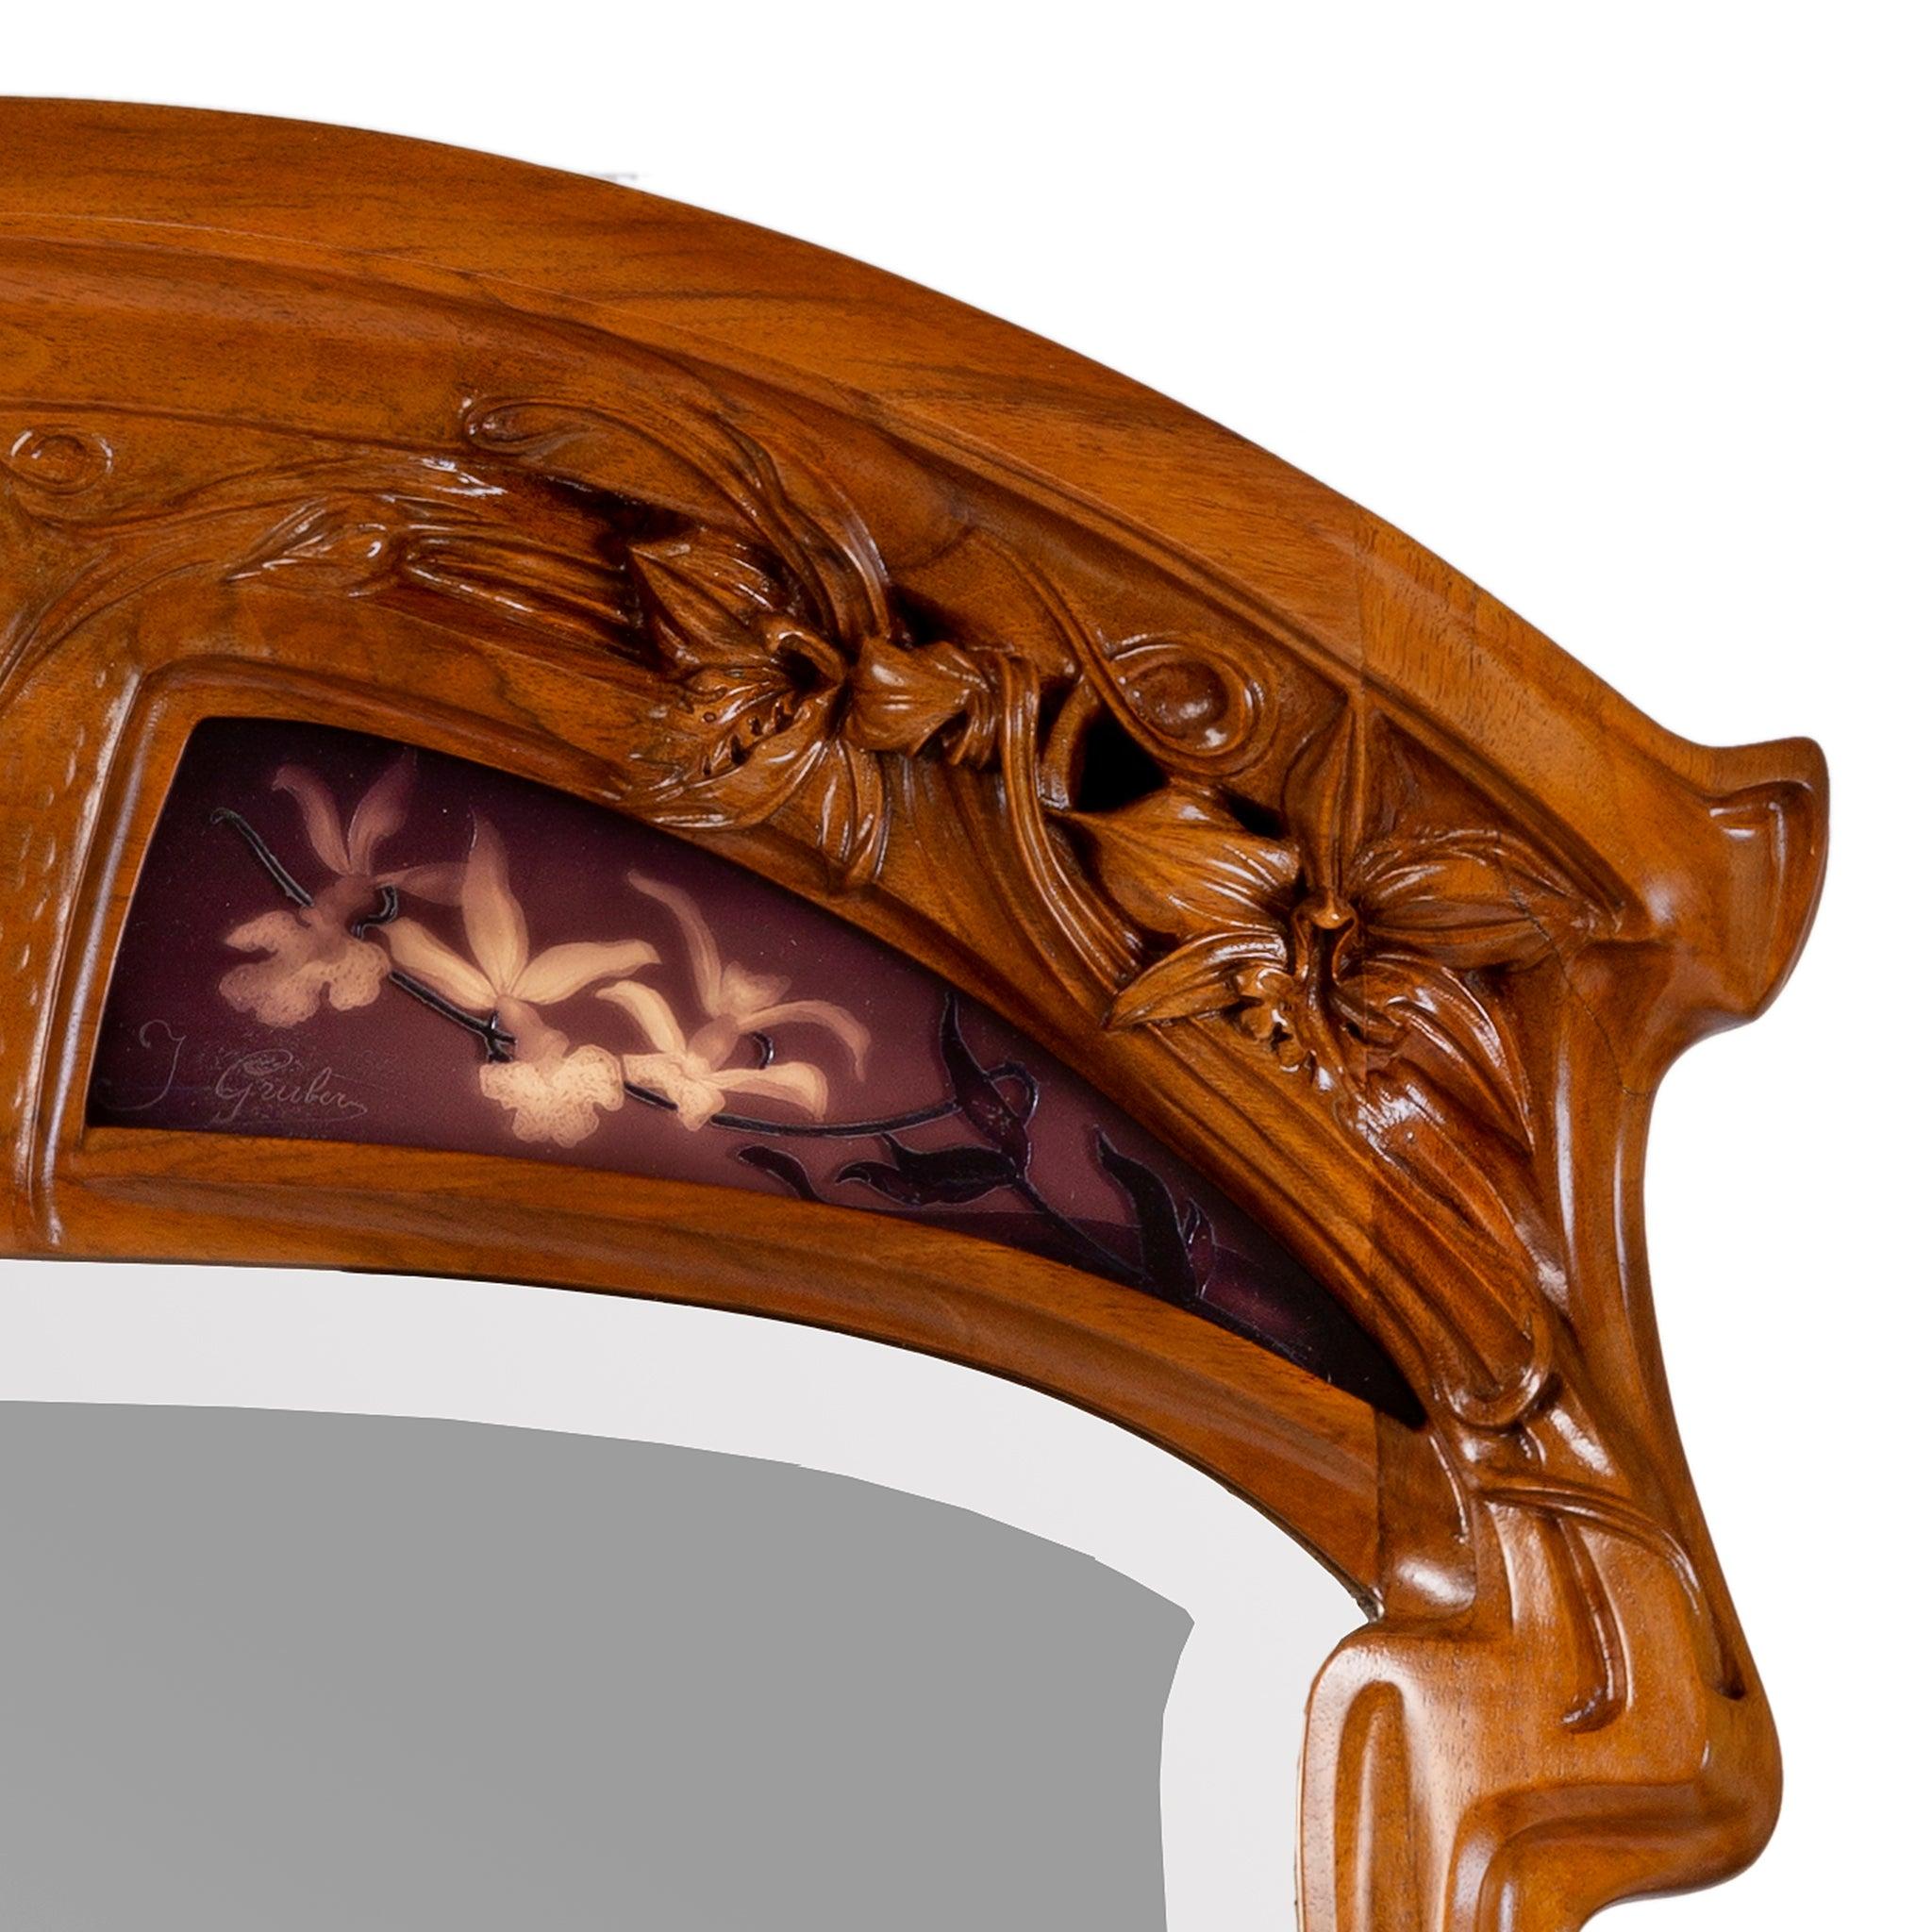 This Jacques Gruber aux orchidée mirror features carved walnut Phaius orchids and inset burgundy cameo glass panels of Oncidium orchids. The popularity of orchids with European audiences had grown dramatically in the fin de siecle, as new colonial